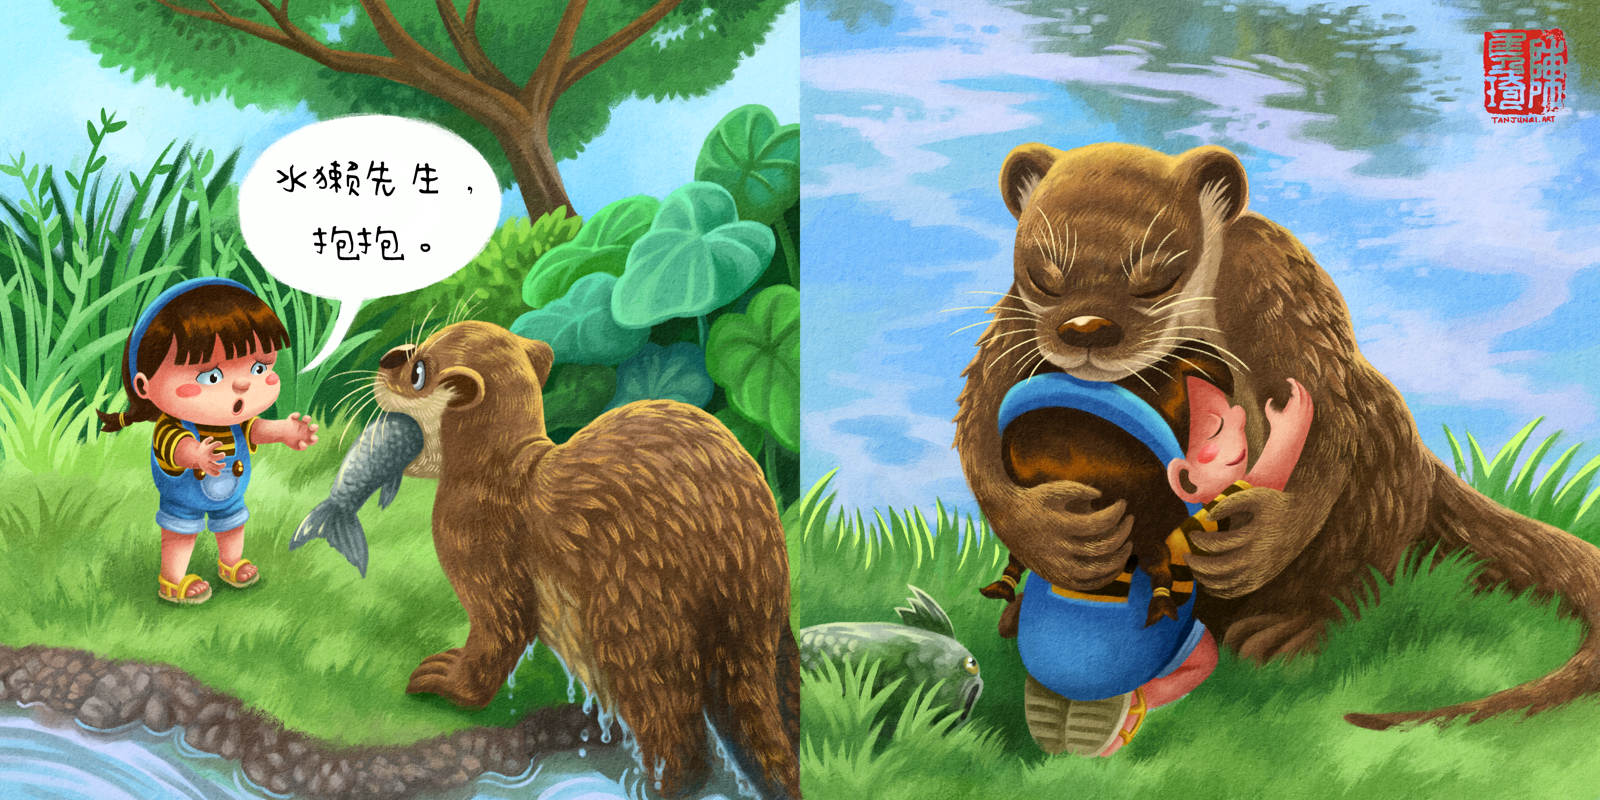 A two-page spread from 'Shan Shan Needs a Hug' (chinese version), showing Shan Shan asking Mr. Otter, who has just come out of the river having caught fish, for a hug. On the next page they hug next to the river.